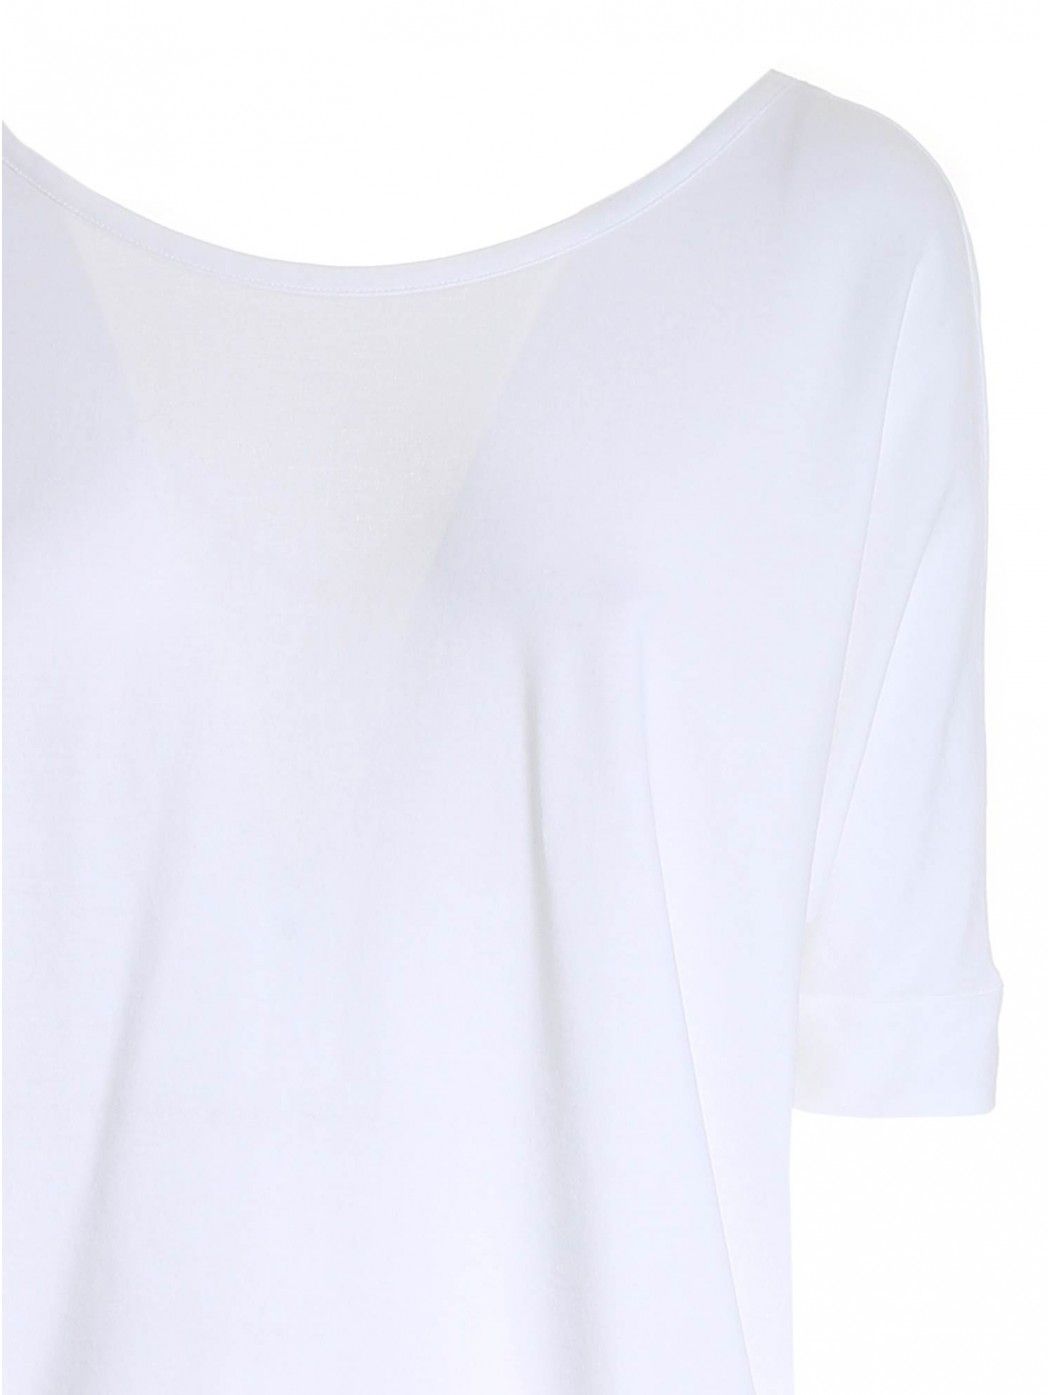 Cotton sweater Color: white Short sleeve Relaxed fit  ZANONE